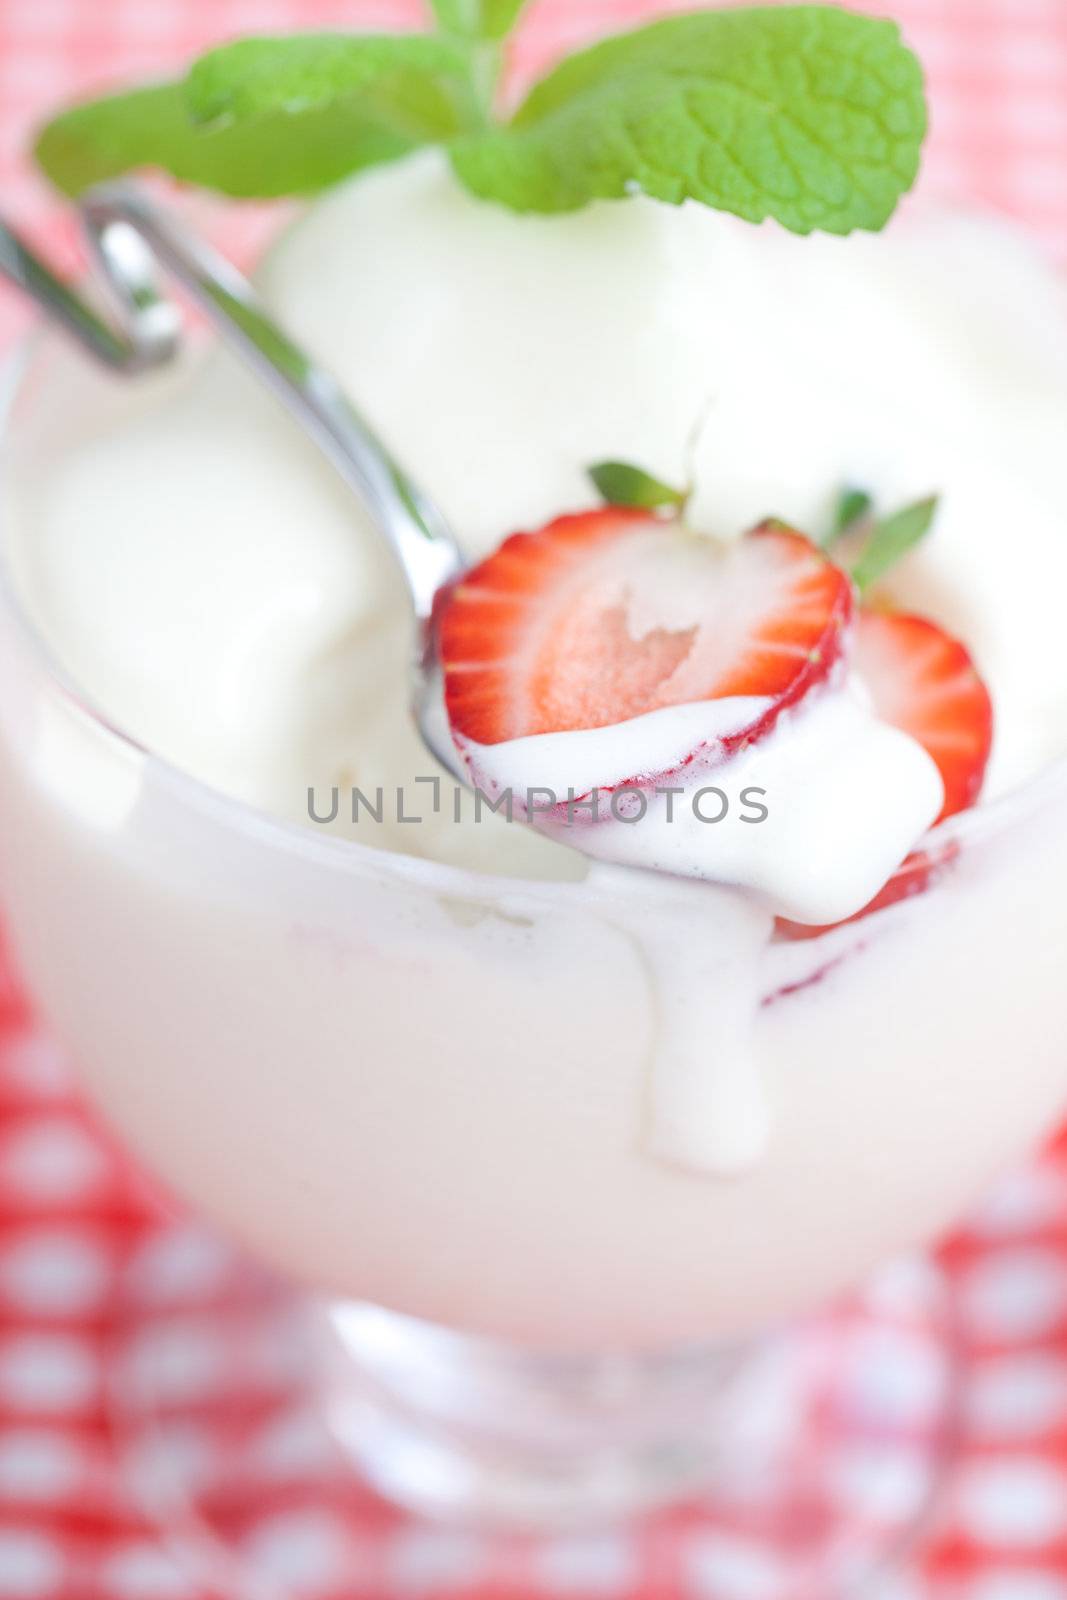 ice cream,strawberry with mint in a glass bowl on plaid fabric